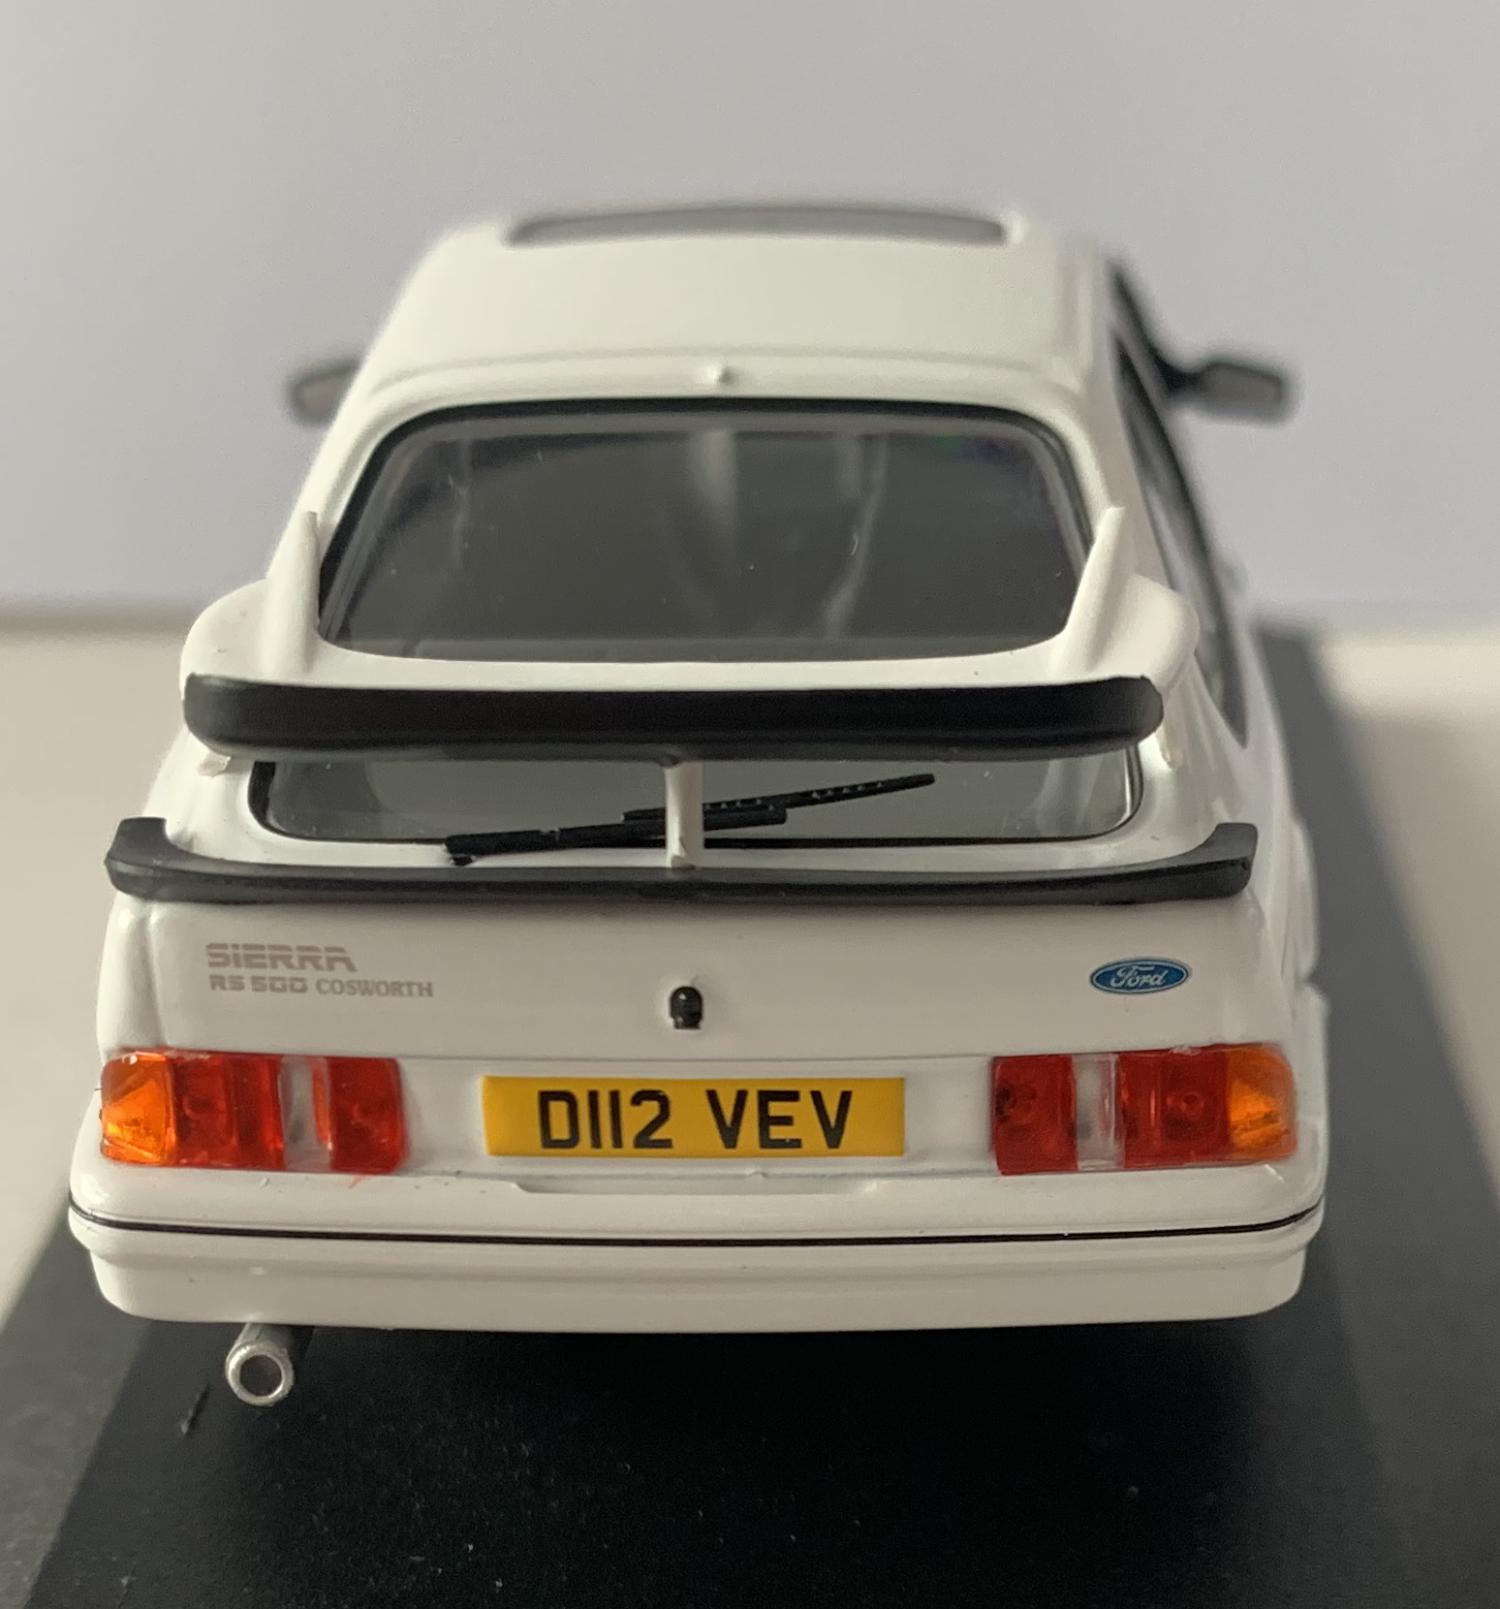 An excellent scale model decorated in diamond white with authentic graphics, rear spoiler, sunroof and silver wheels.  Other trims are finished in black.  The interior is finished in grey with black RHD steering.  Features working wheels.  The Ford badge is finely replicated on the front and extends to the rear with the lettering Sierra RS500 Cosworth.  Model is presented on a removable plinth with a removeable hard plastic cover.  One of a Limited Edition of 1,500 pieces and includes a Limited Edition Collector Card.  Model presented in Corgi Vanguards packaging